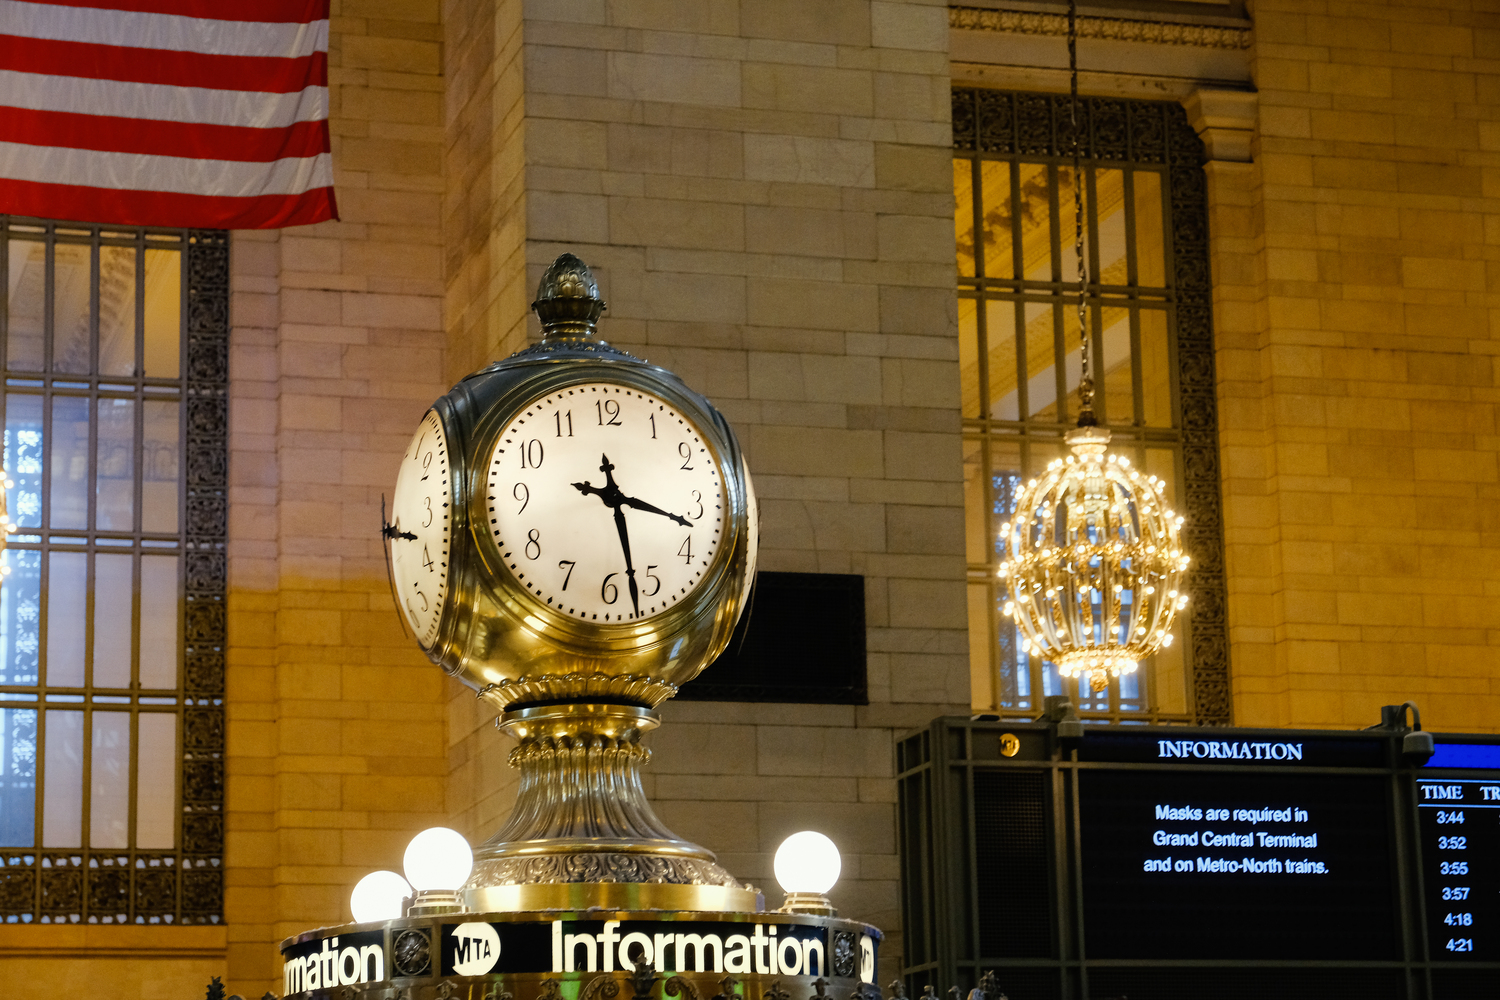 Grand Central Terminal: Always Moving